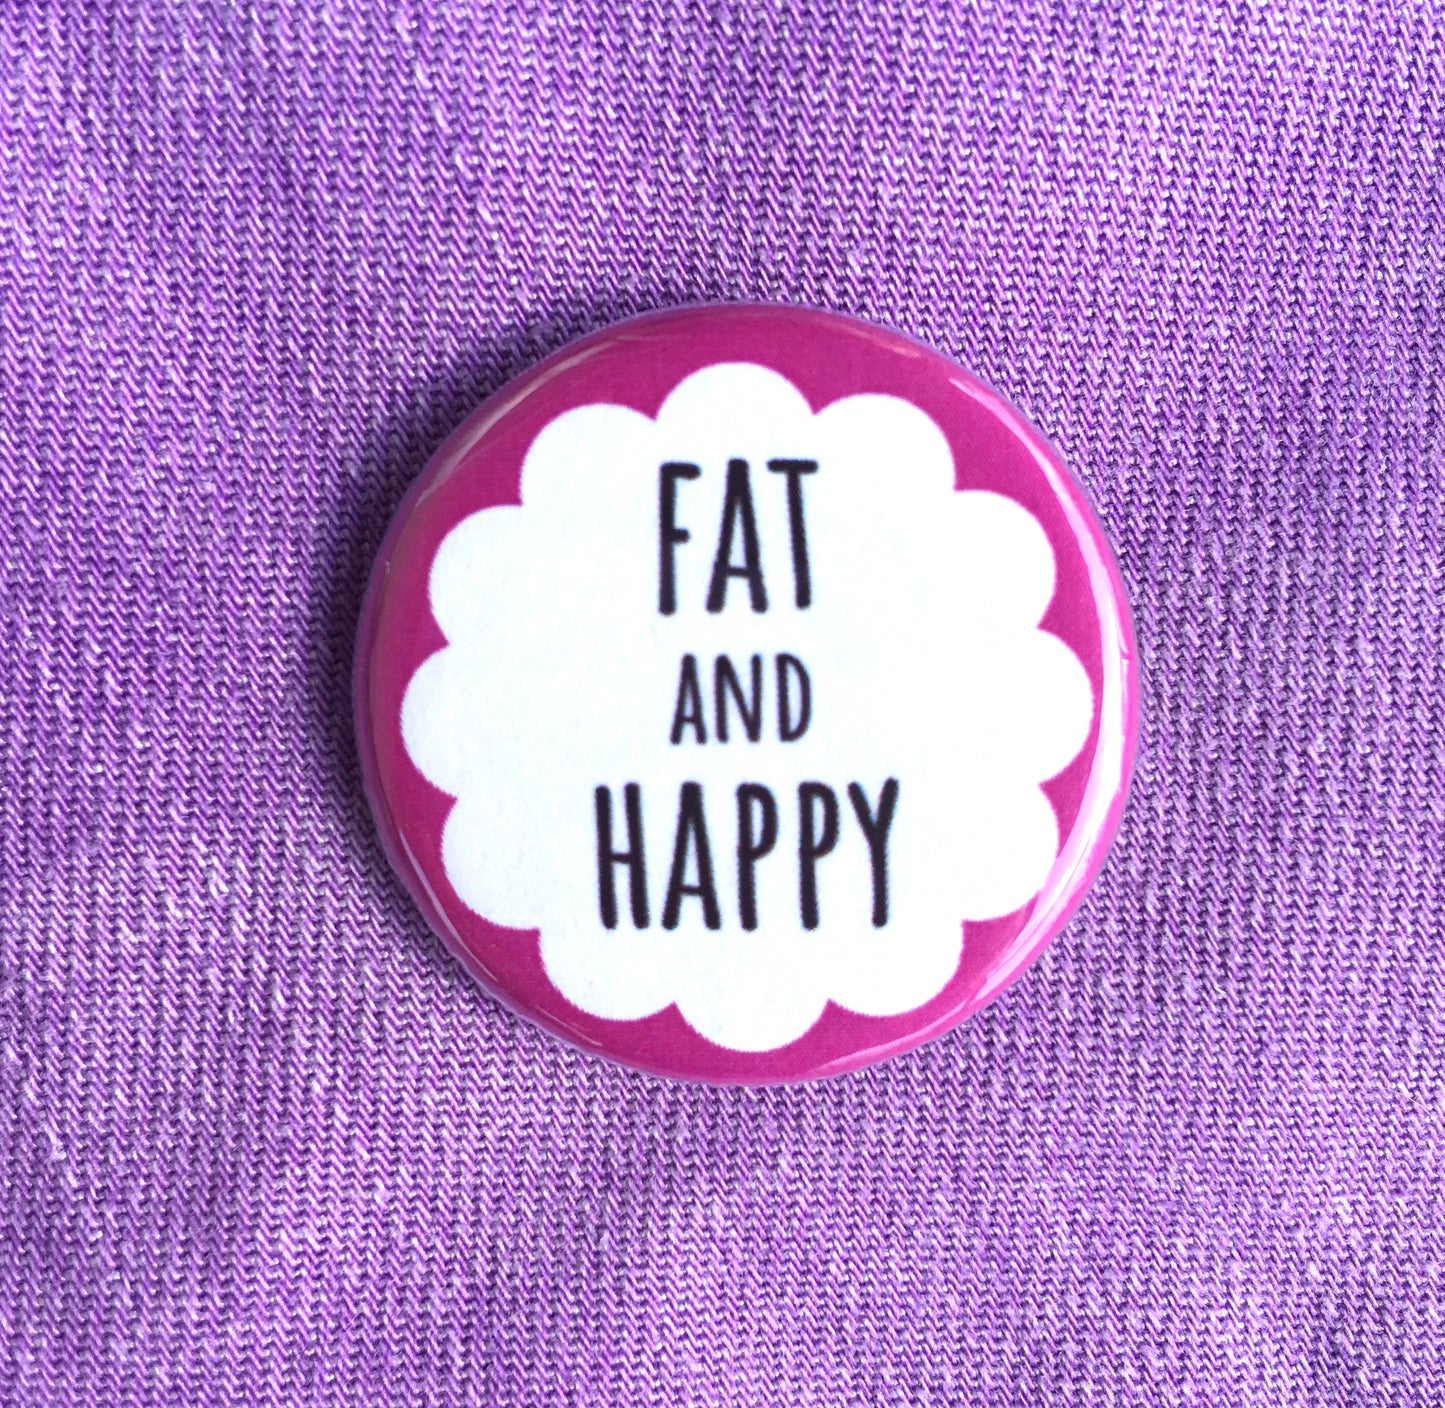 Fat and happy - Radical Buttons